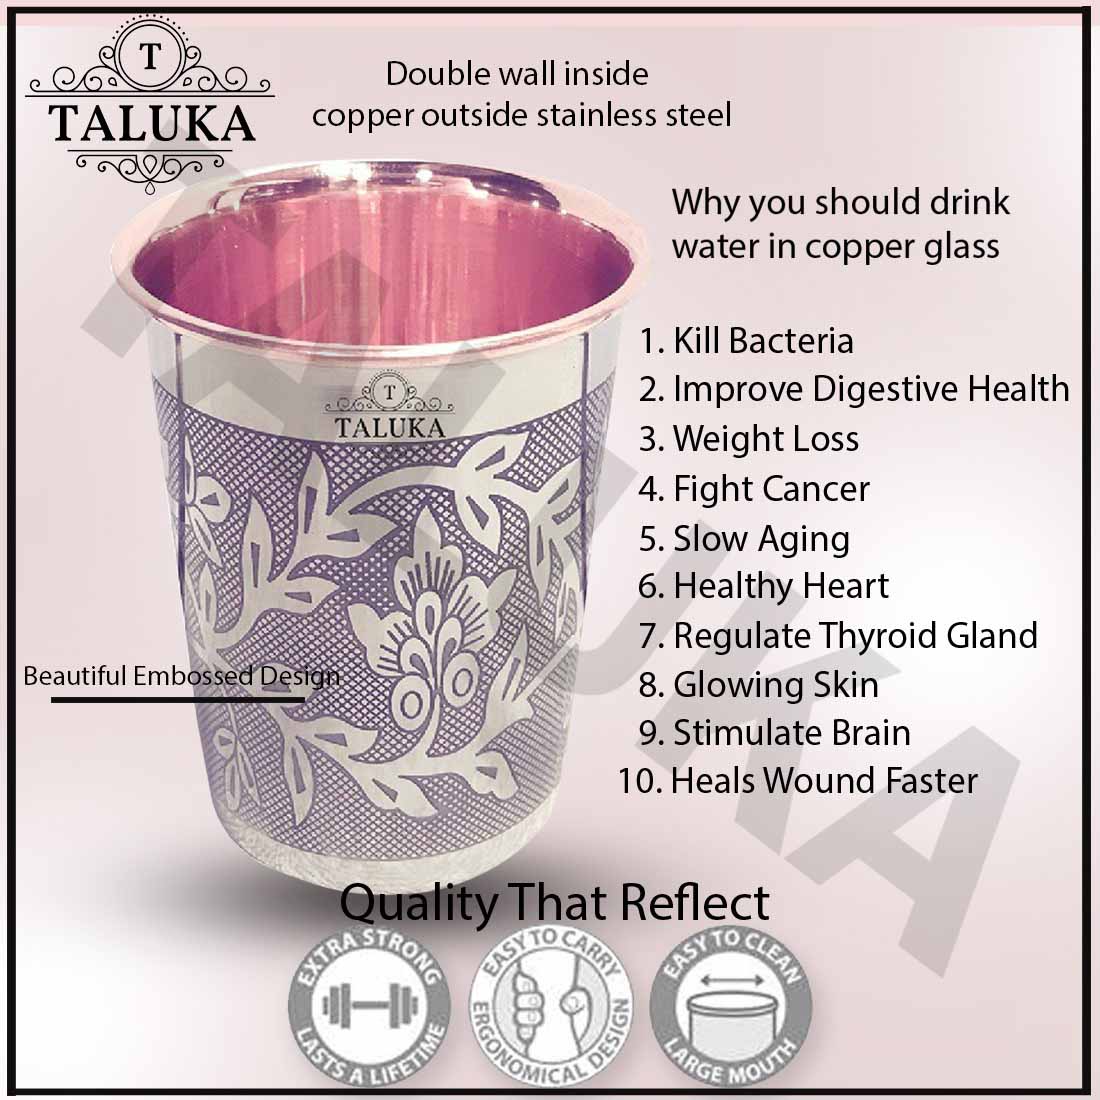 Stainless Steel Copper Glass Etching Embossed Design Tumbler Cup, Drinkware Serveware, Health Benefits Ayurveda Yoga, 4 inch Set of 1 Glass (Copper and Silver)